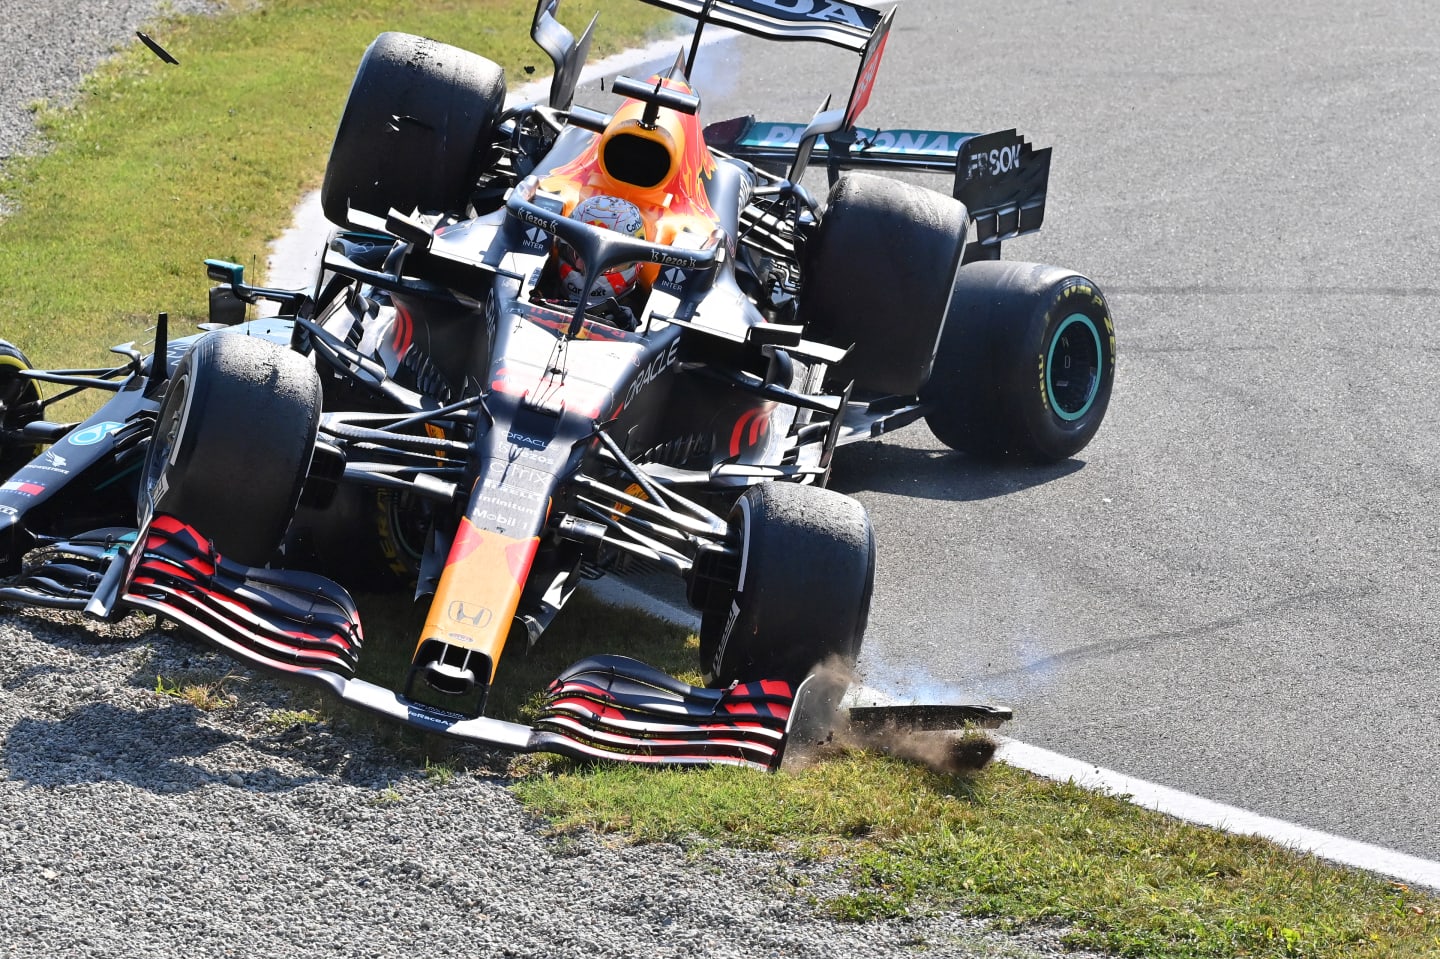 MONZA, ITALY - SEPTEMBER 12: Max Verstappen of the Netherlands driving the (33) Red Bull Racing